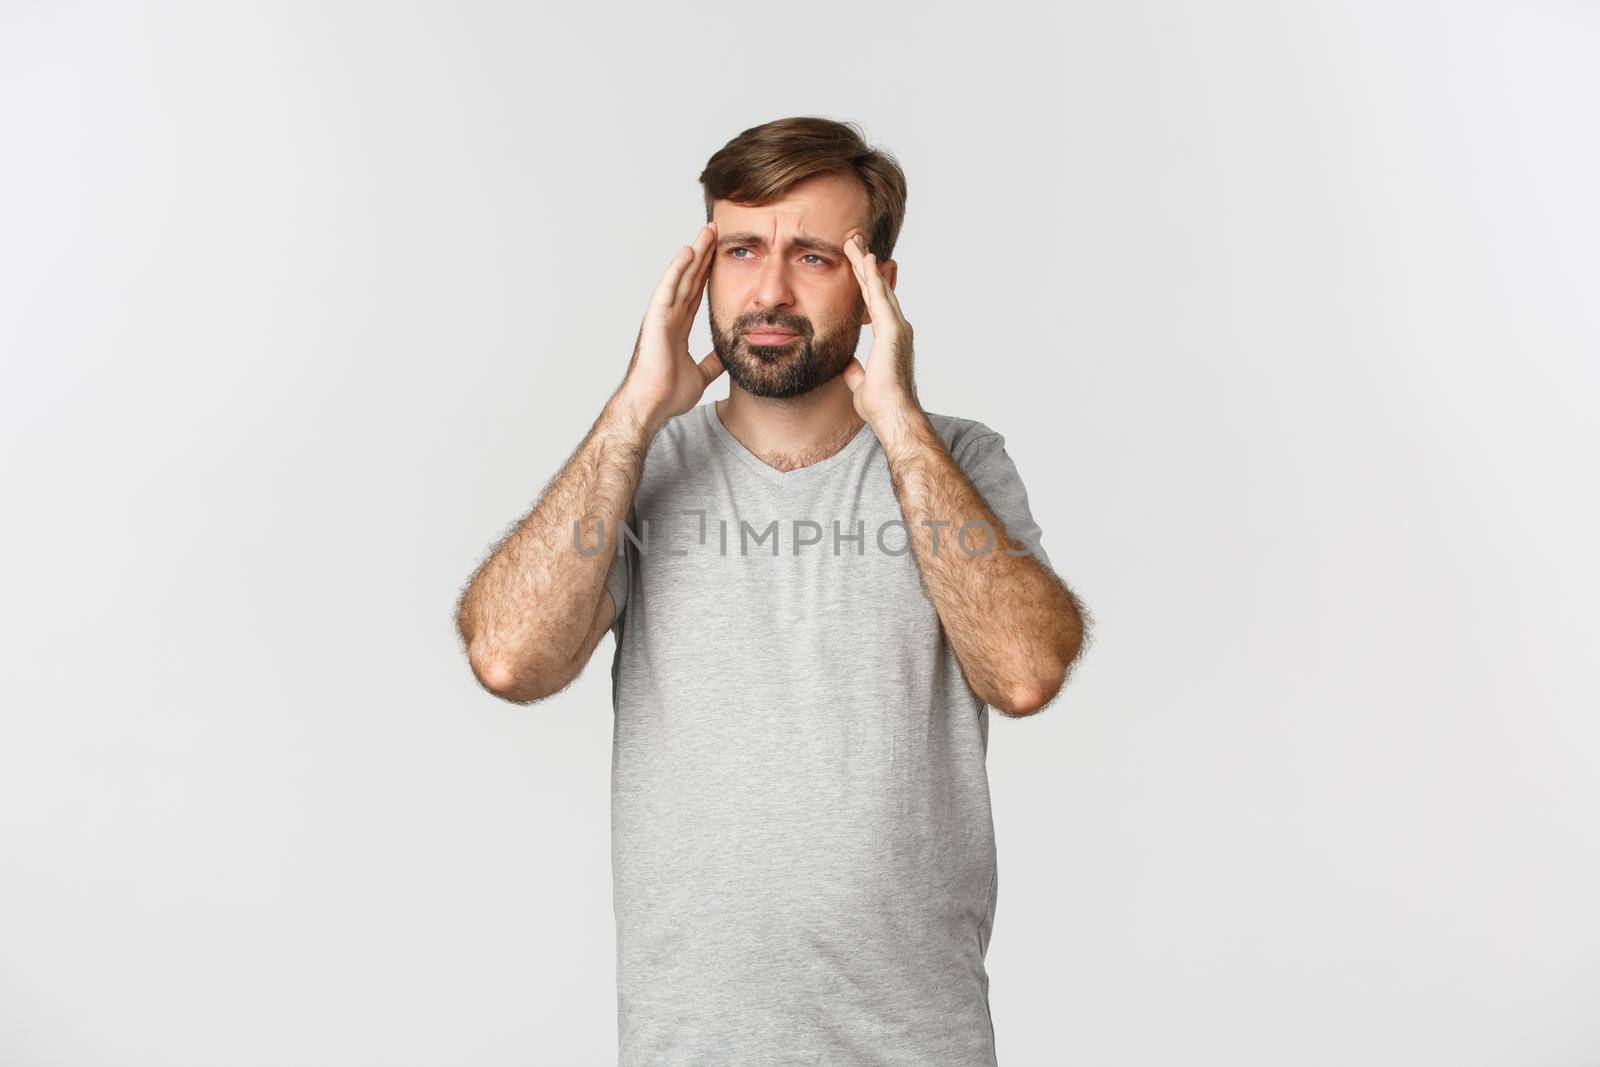 Man having a severe headache, grimacing and touching head, feeling dizzy or sick, standing in gray t-shirt over white background by Benzoix